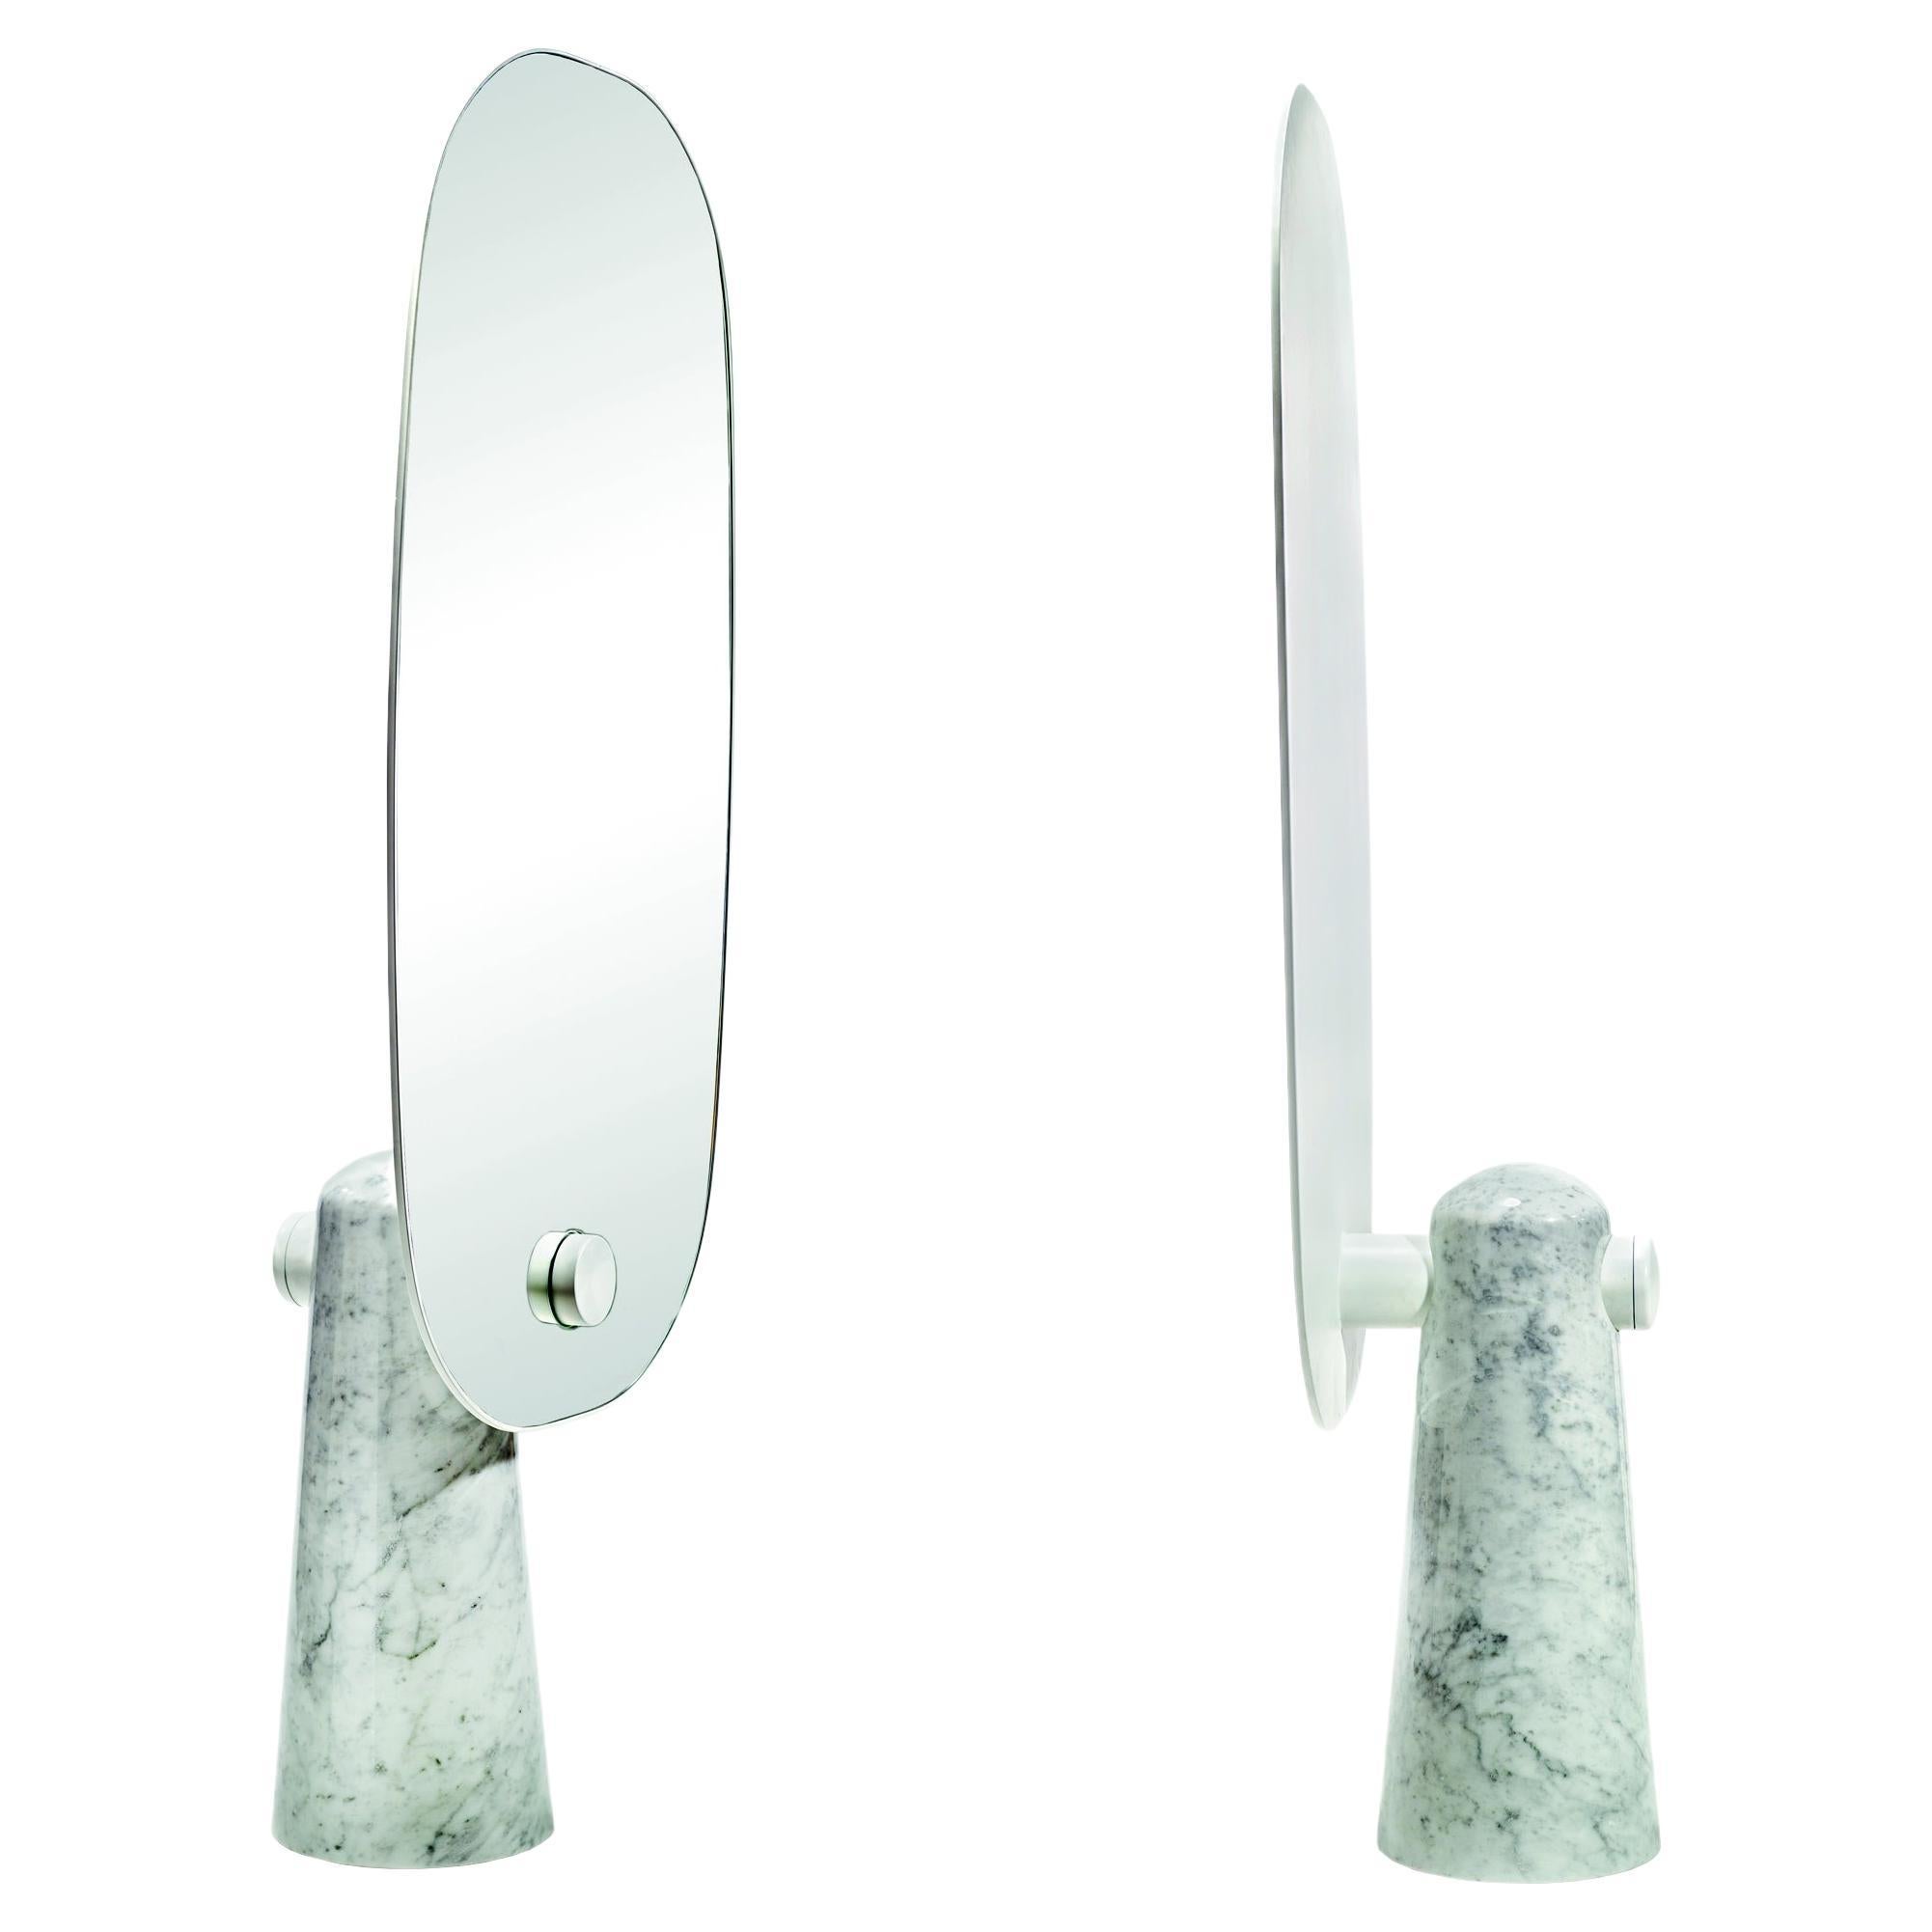 White Iconic Mirror by Dan Yeffet and Lucie Koldova for La Chance For Sale